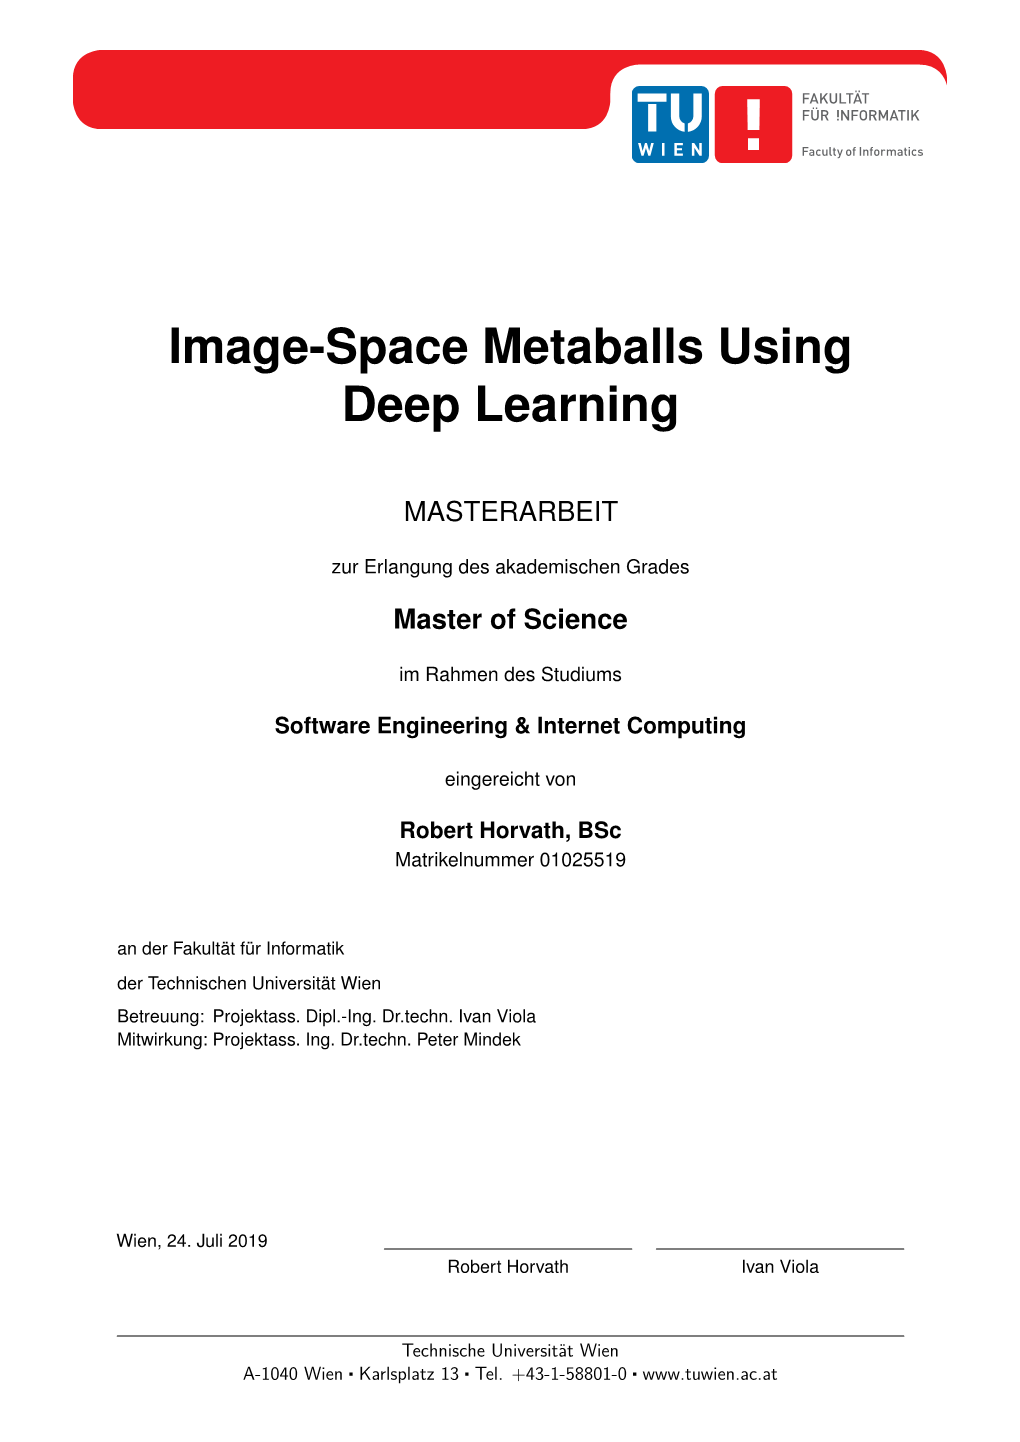 Image-Space Metaballs Using Deep Learning